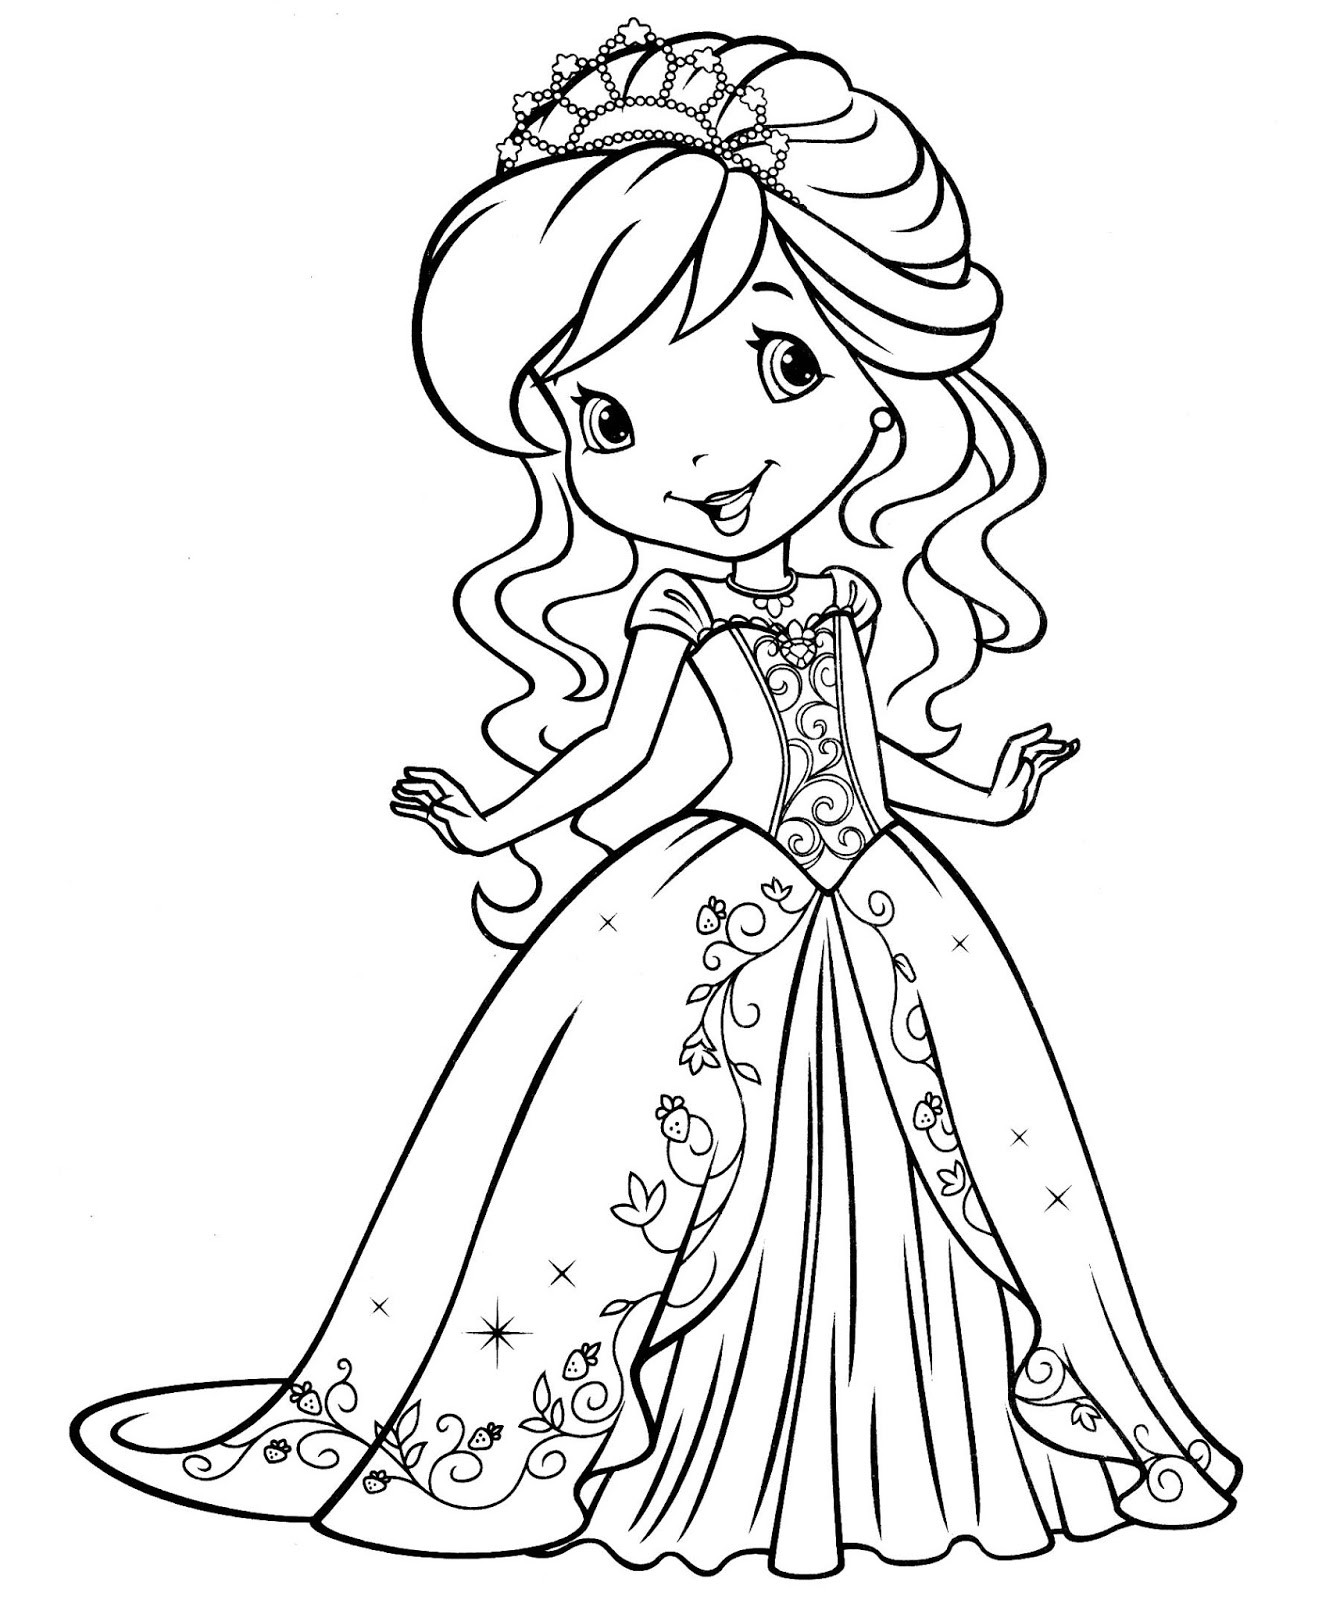 Cute Girls Coloring Pages
 Coloring Pages for Girls Best Coloring Pages For Kids